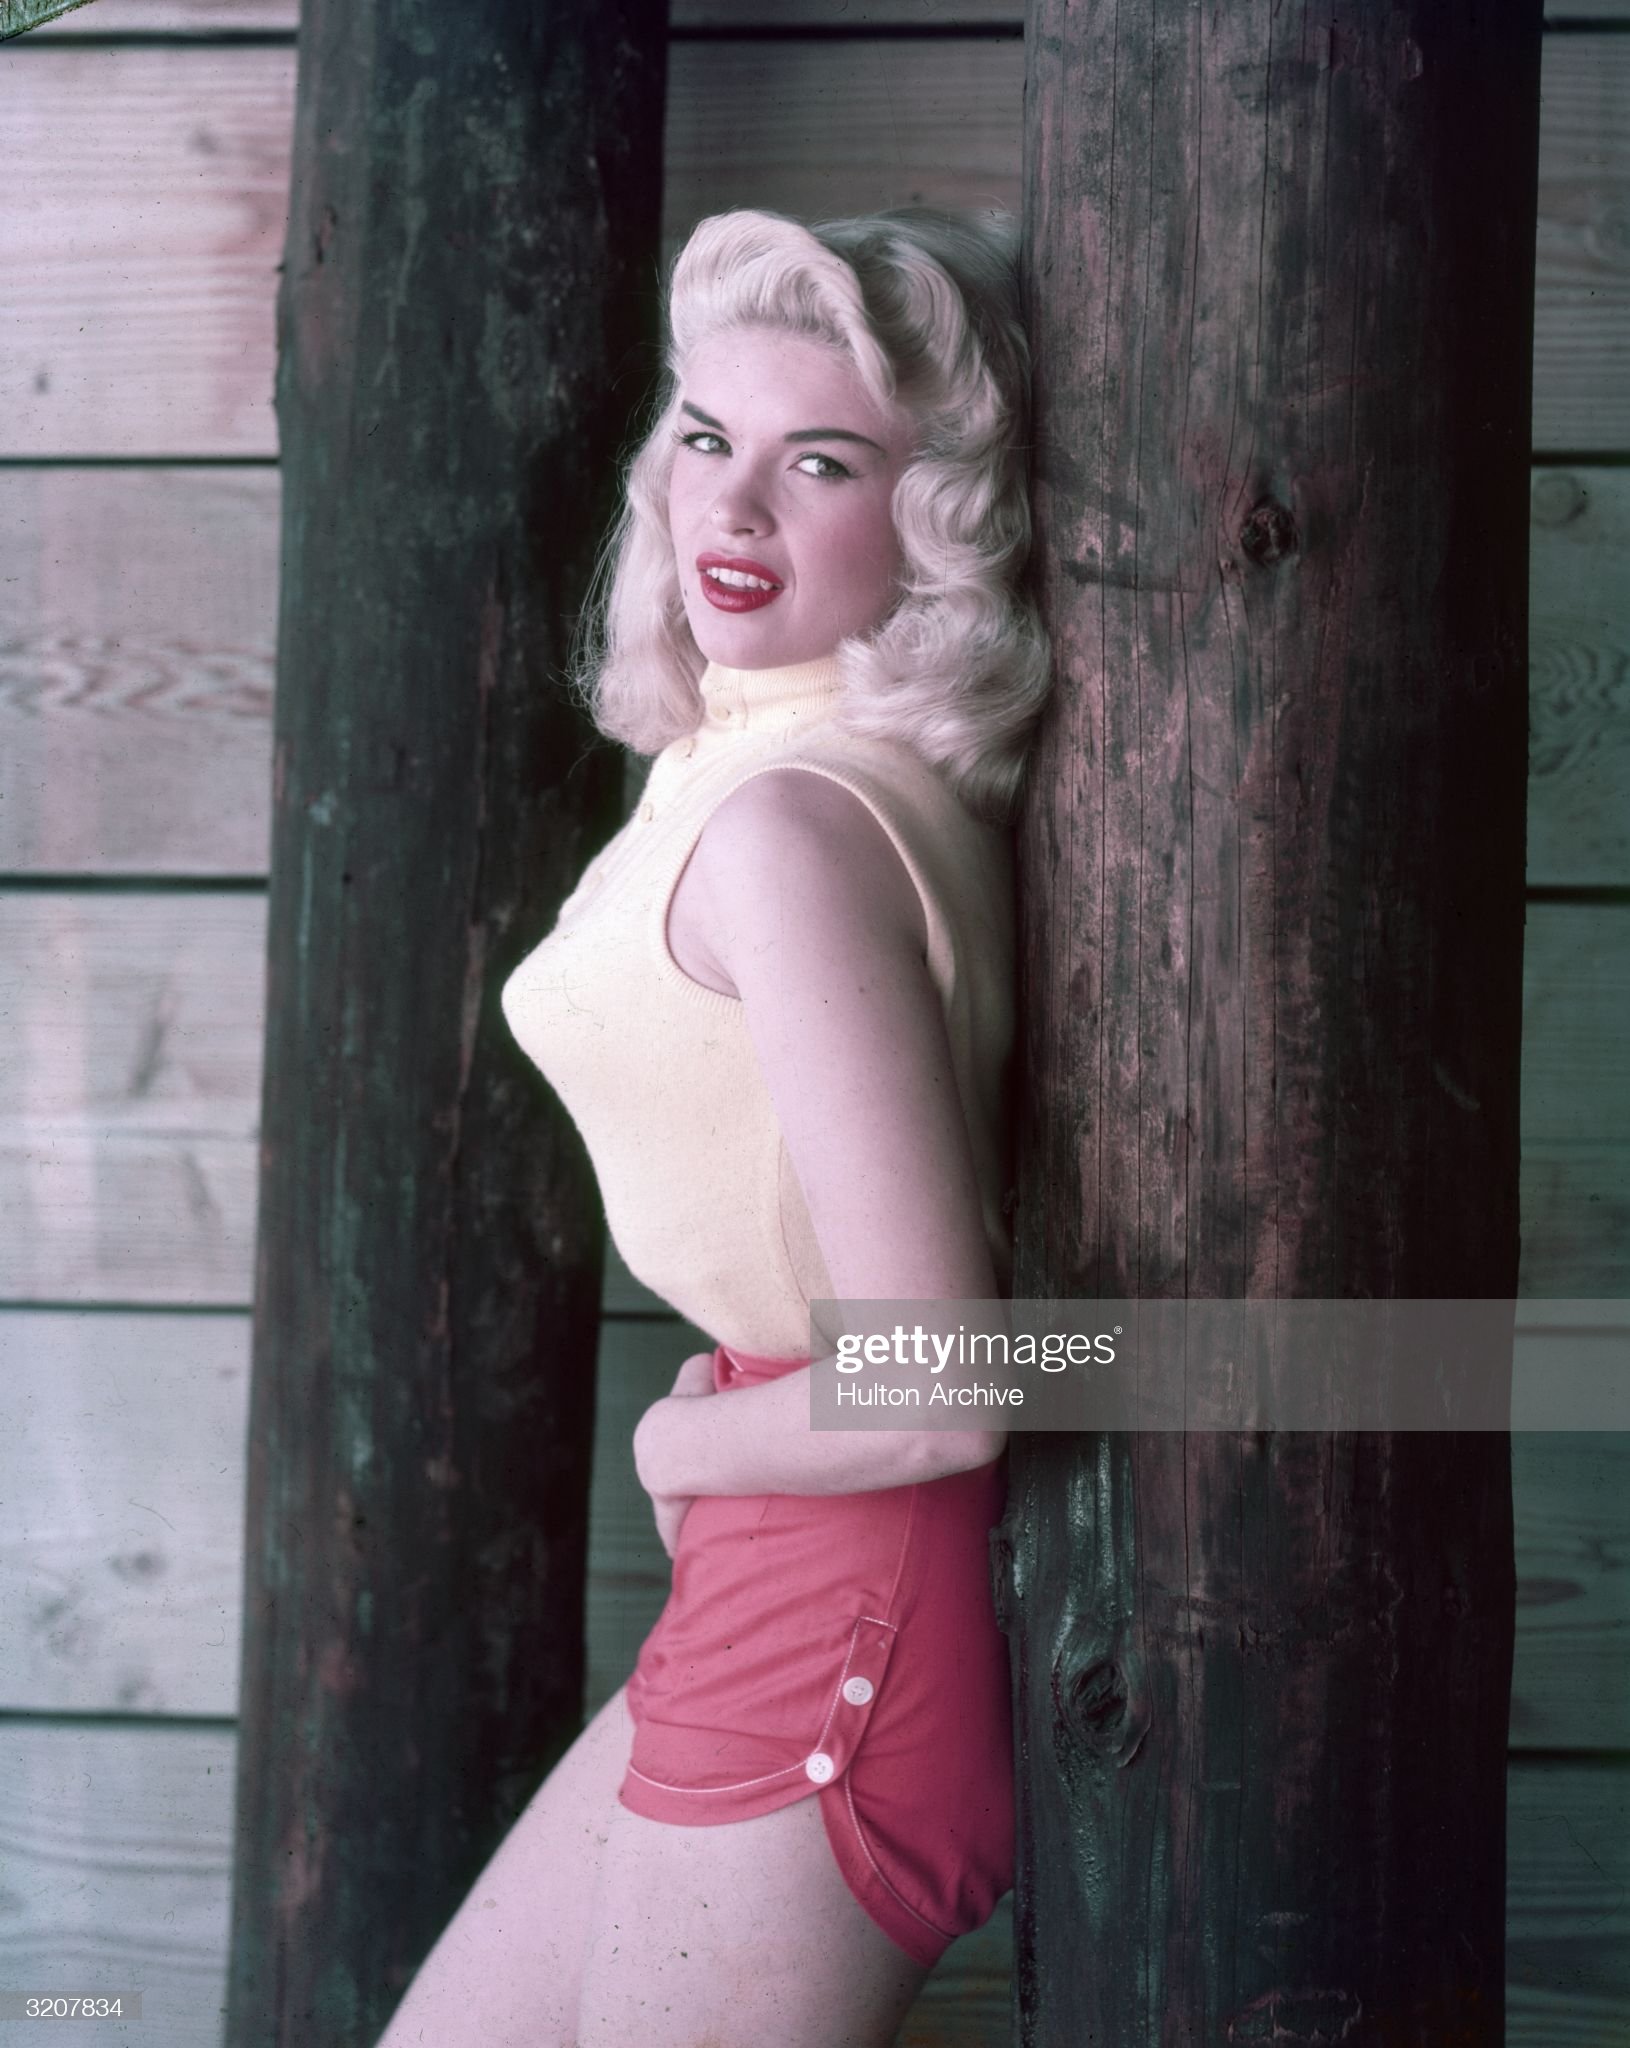 Circa 1955: portrait of American actor Jayne Mansfield, wearing a sleeveless sweater, pointy bra and red shorts, leaning against a wooden post, 1950s.